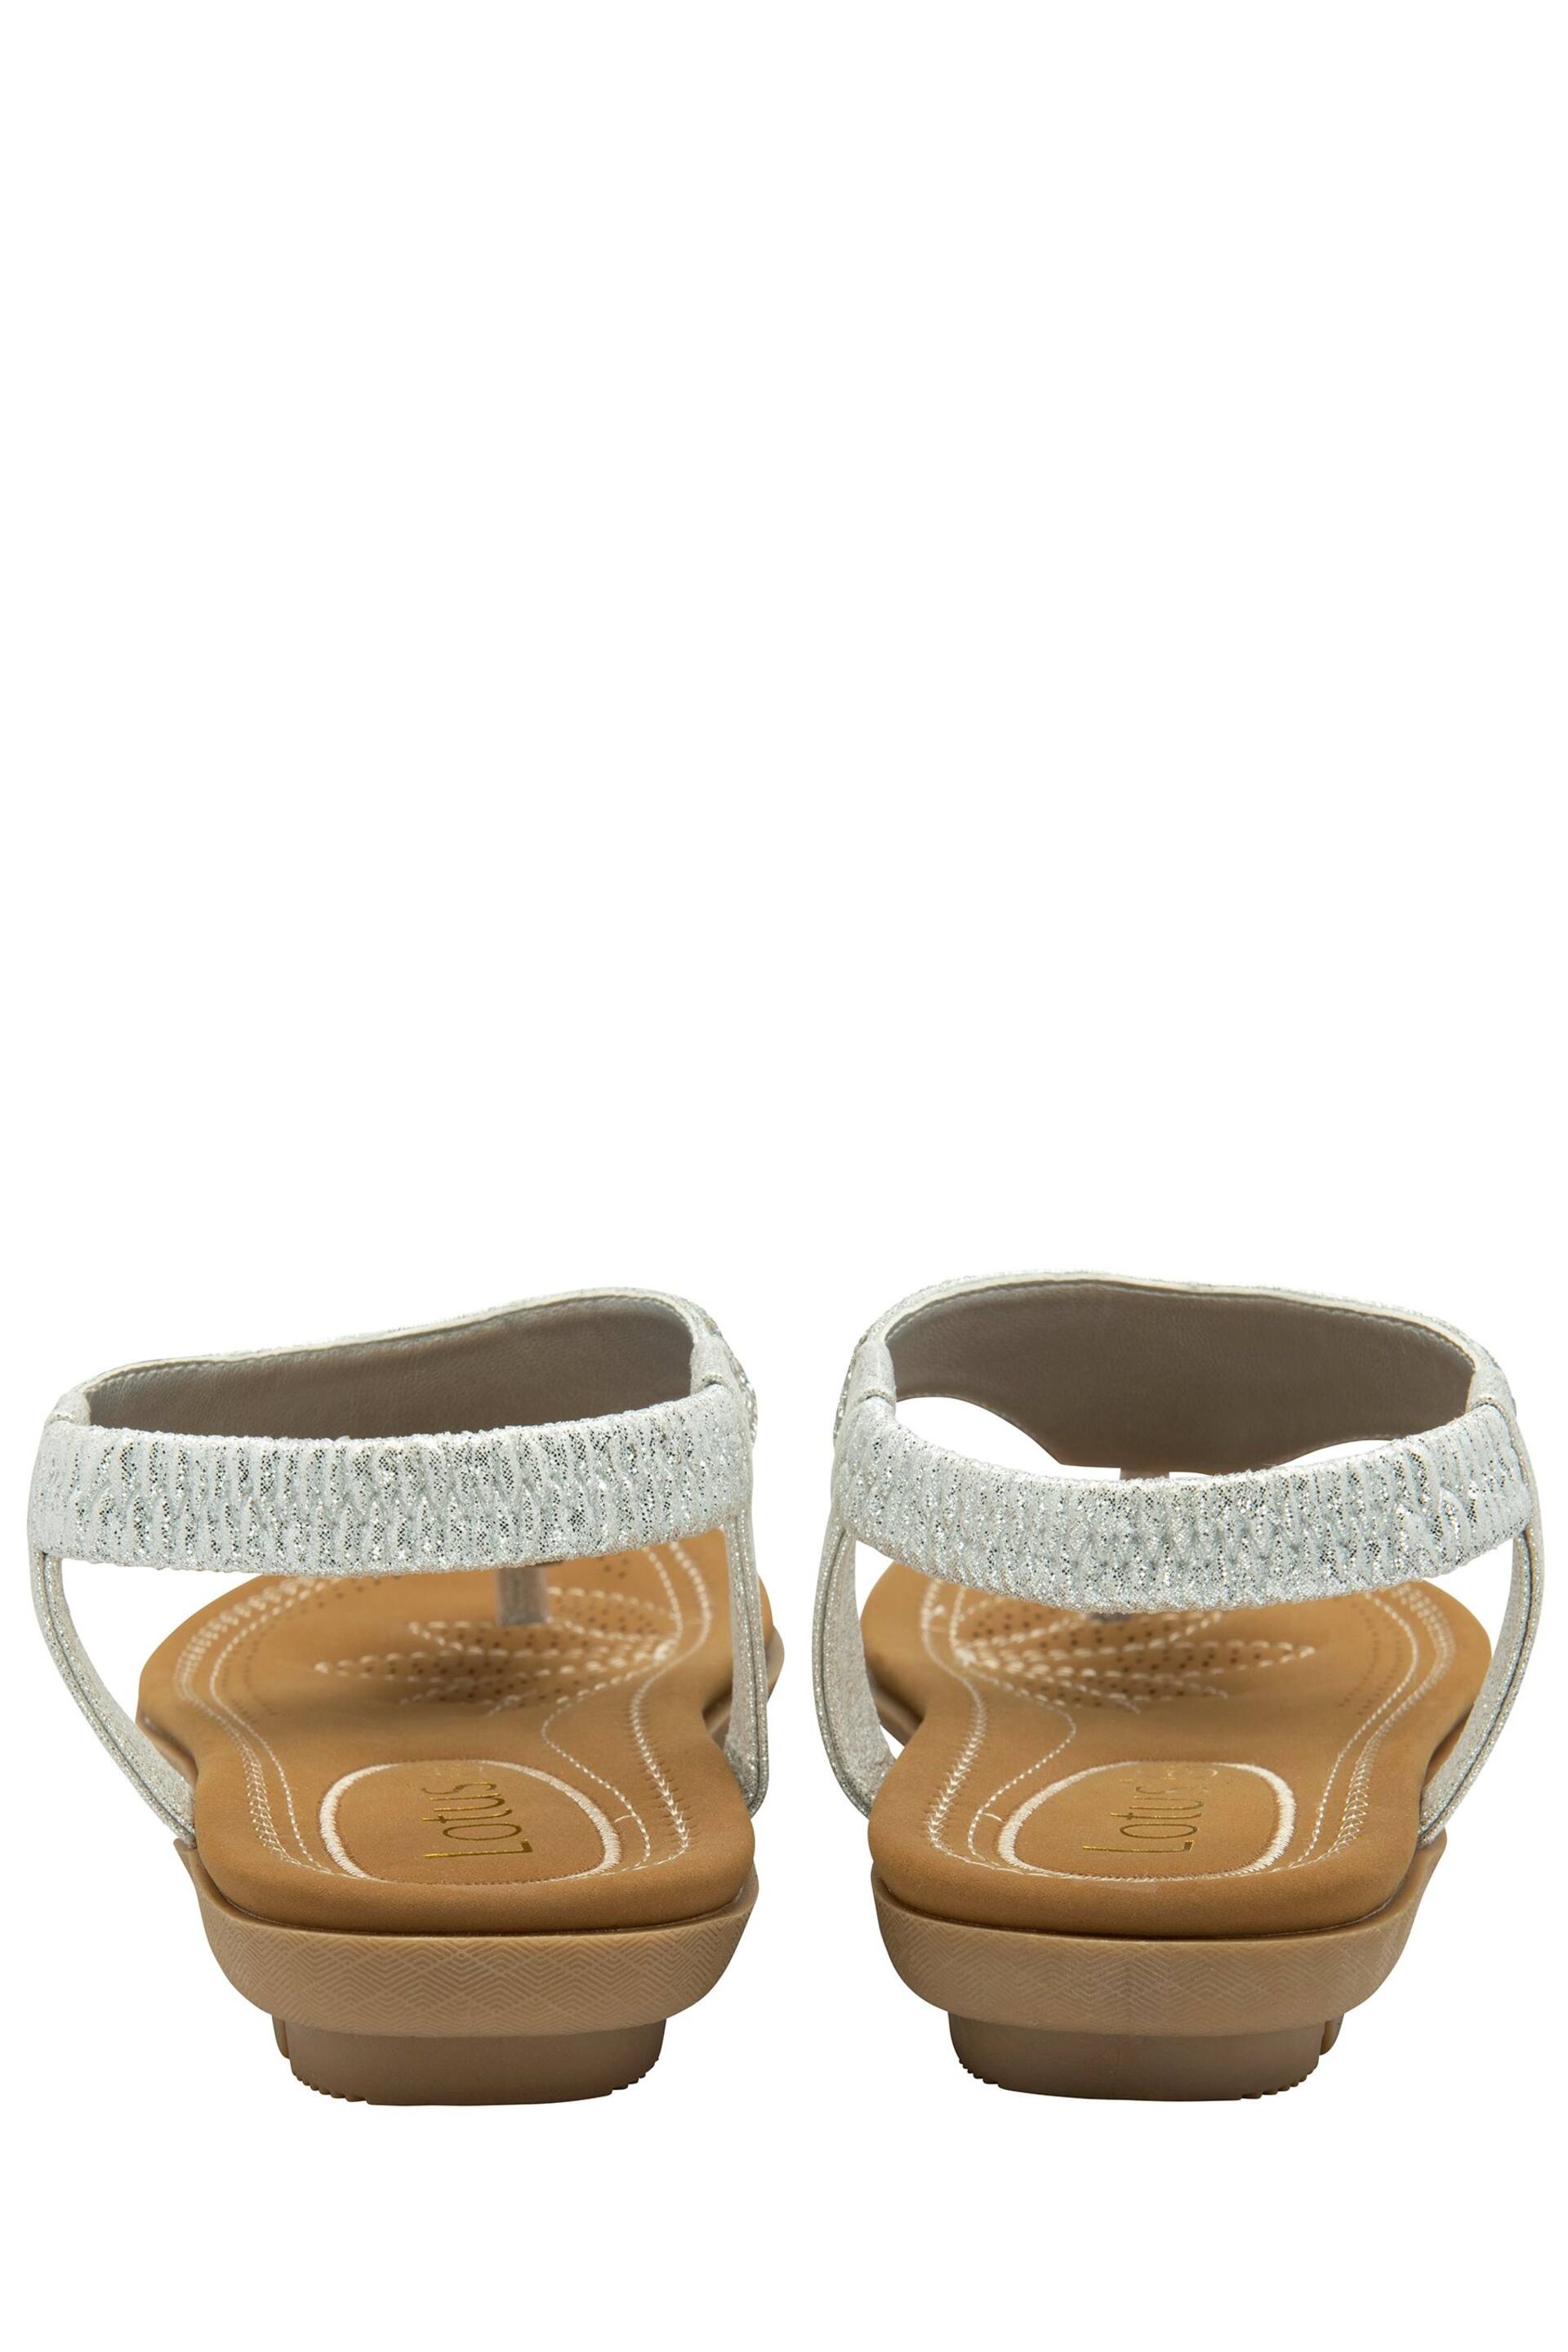 Lotus Silver Casual Toe Thong Holiday Sandals - Image 3 of 4